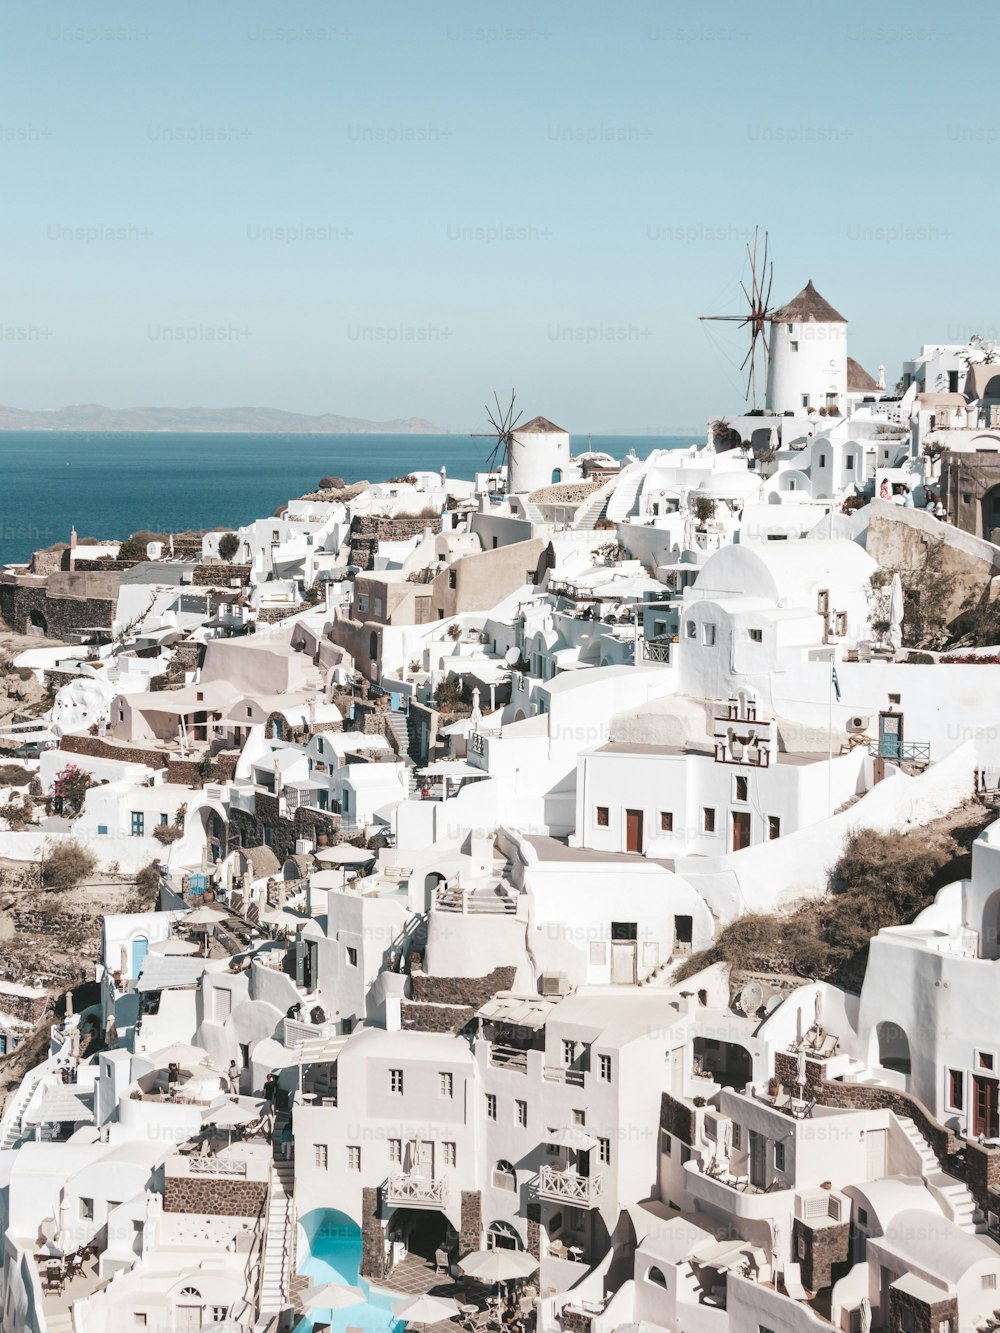 The beautiful cityscape of the white buildings of Santorini under the clear blue sky in Greece